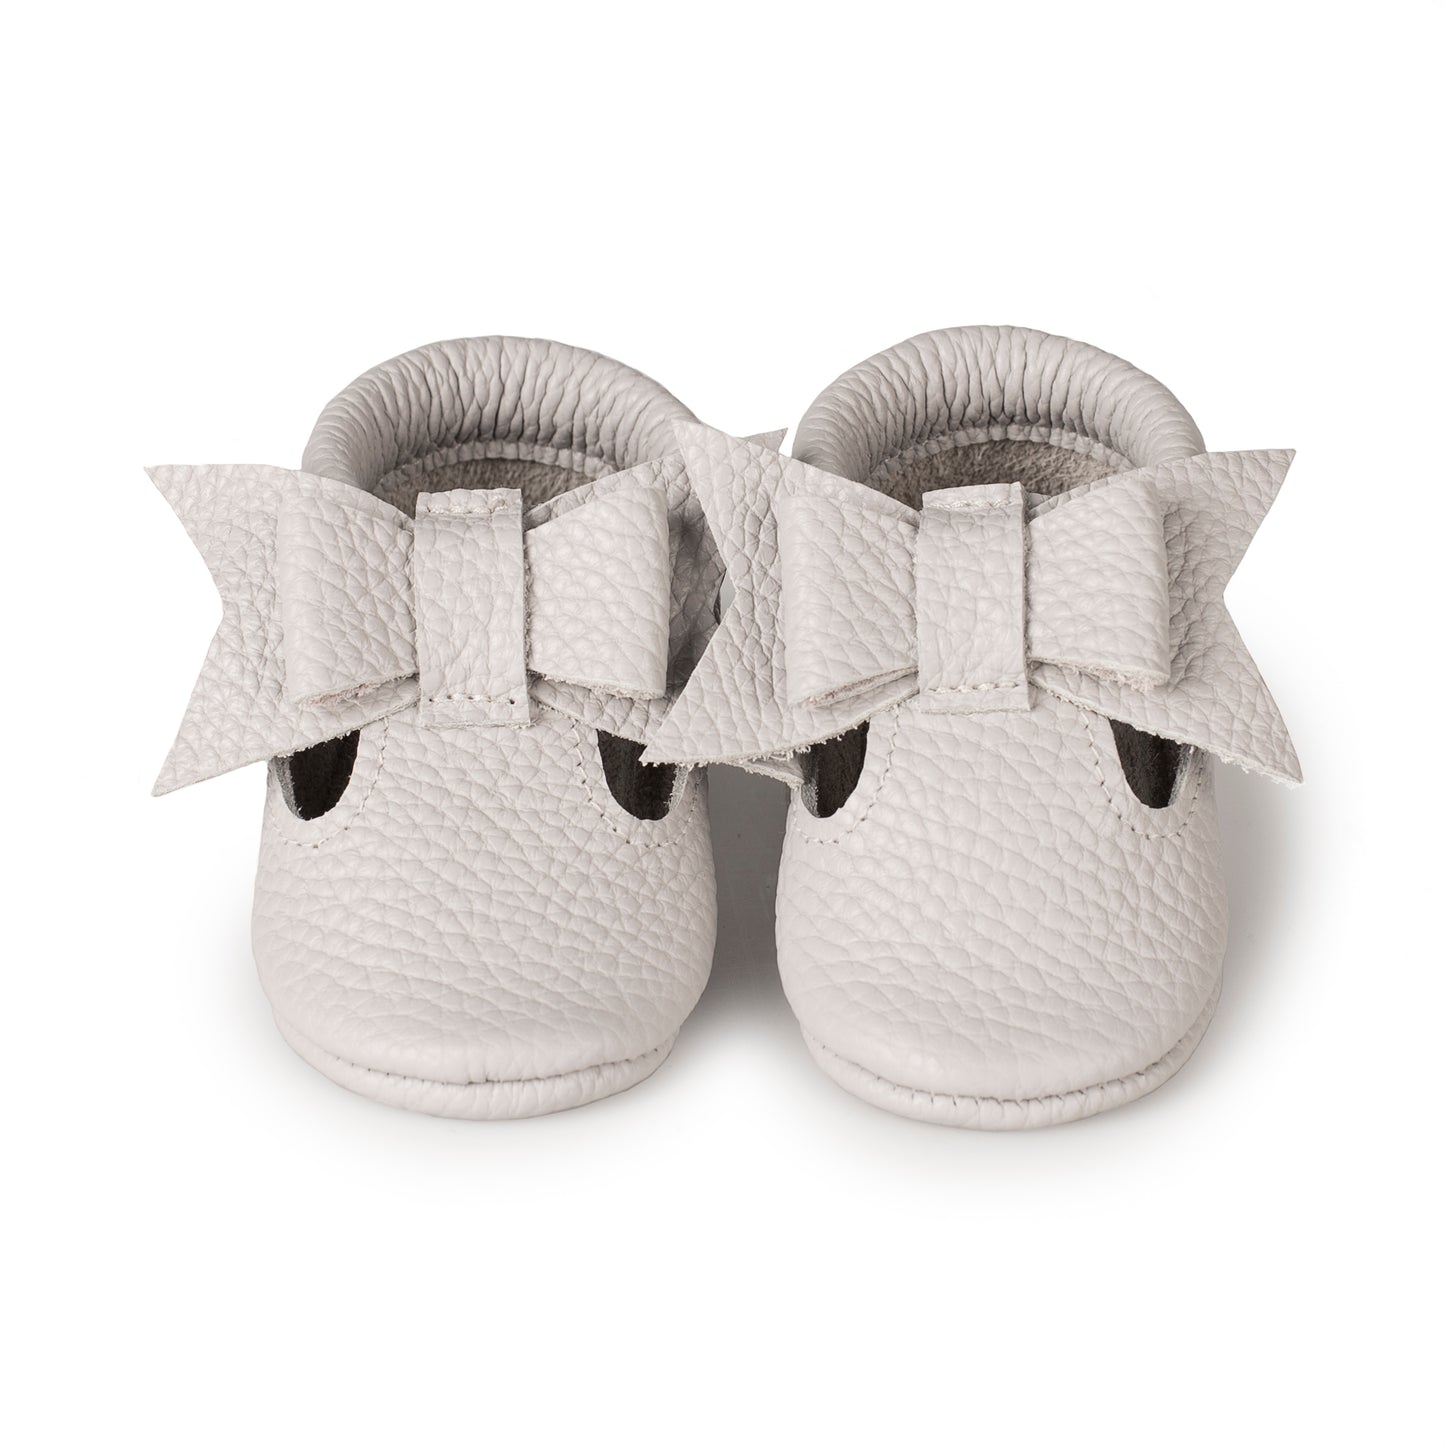 Eco-friendly baby shoes